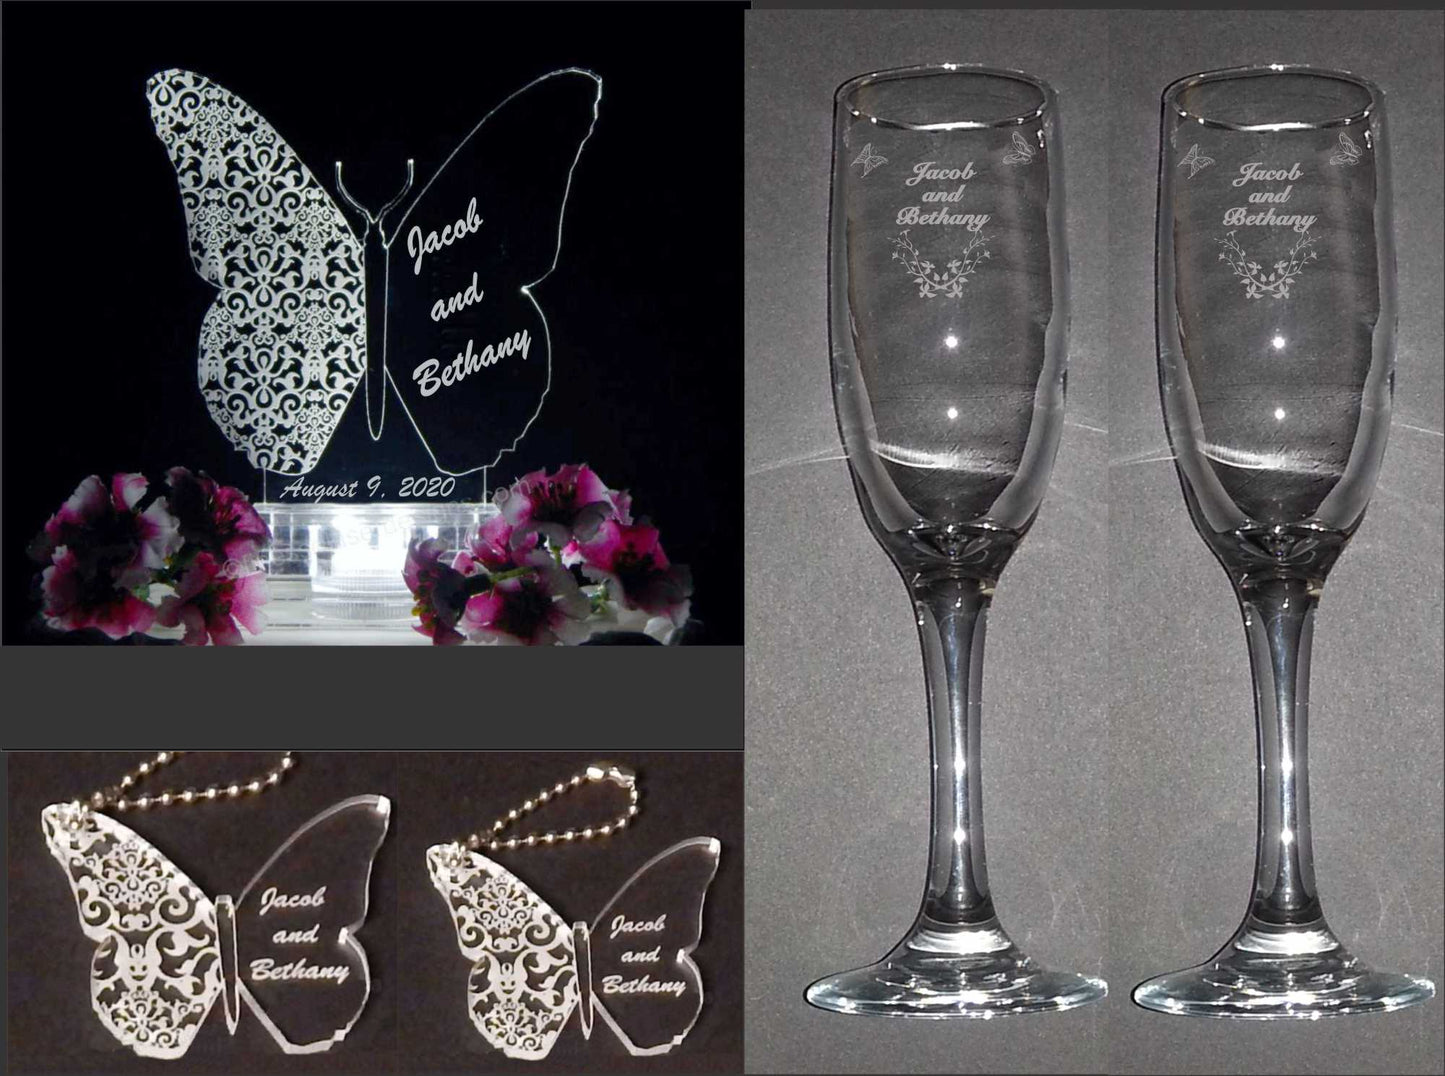 photo shows package that includes butterfly shaped acrylic cake topper, 2 sized of keychains, and a set of champagne flutes